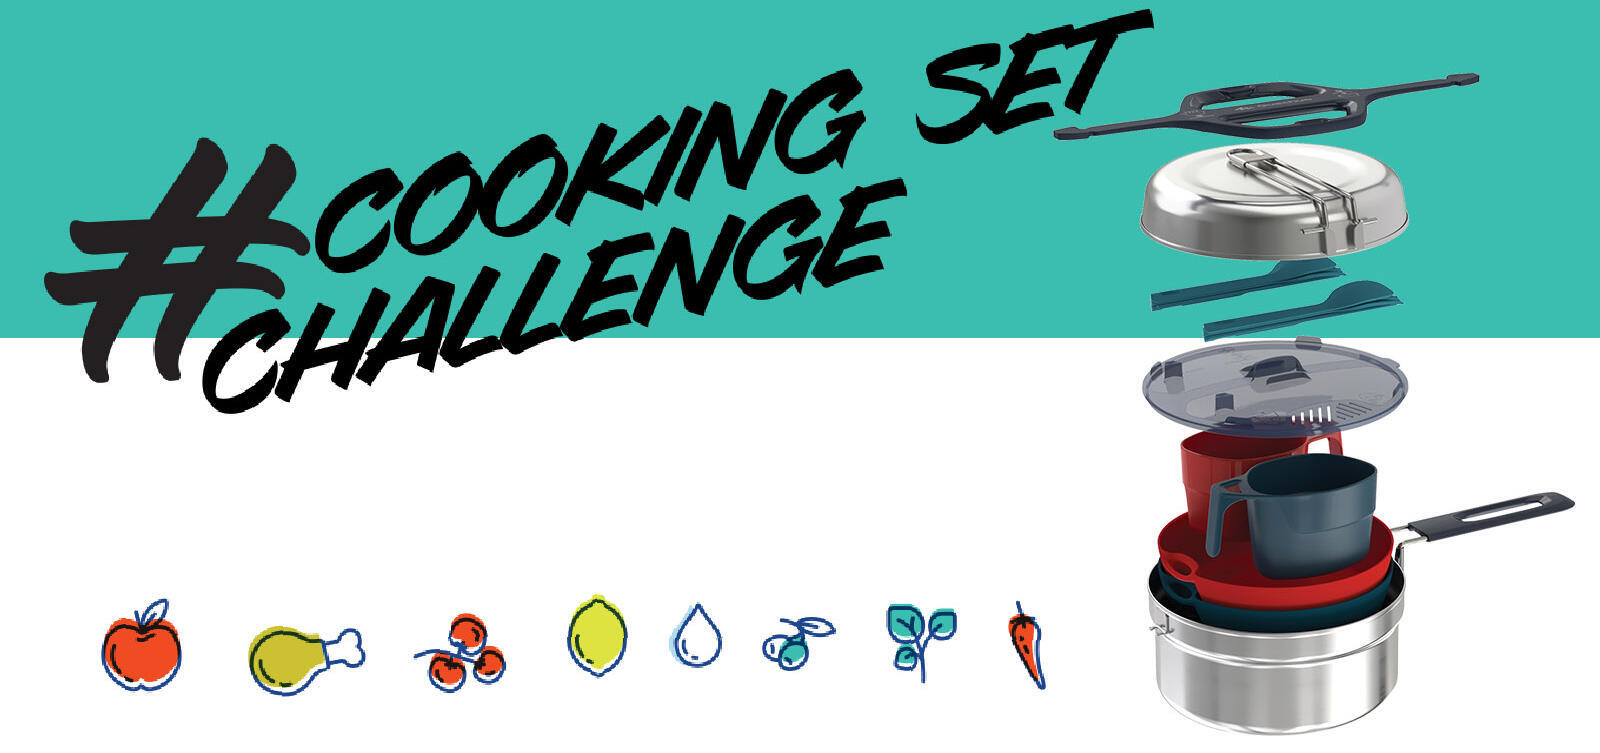 cooking set challenge recipes camp mountain hiking quechua decathlon